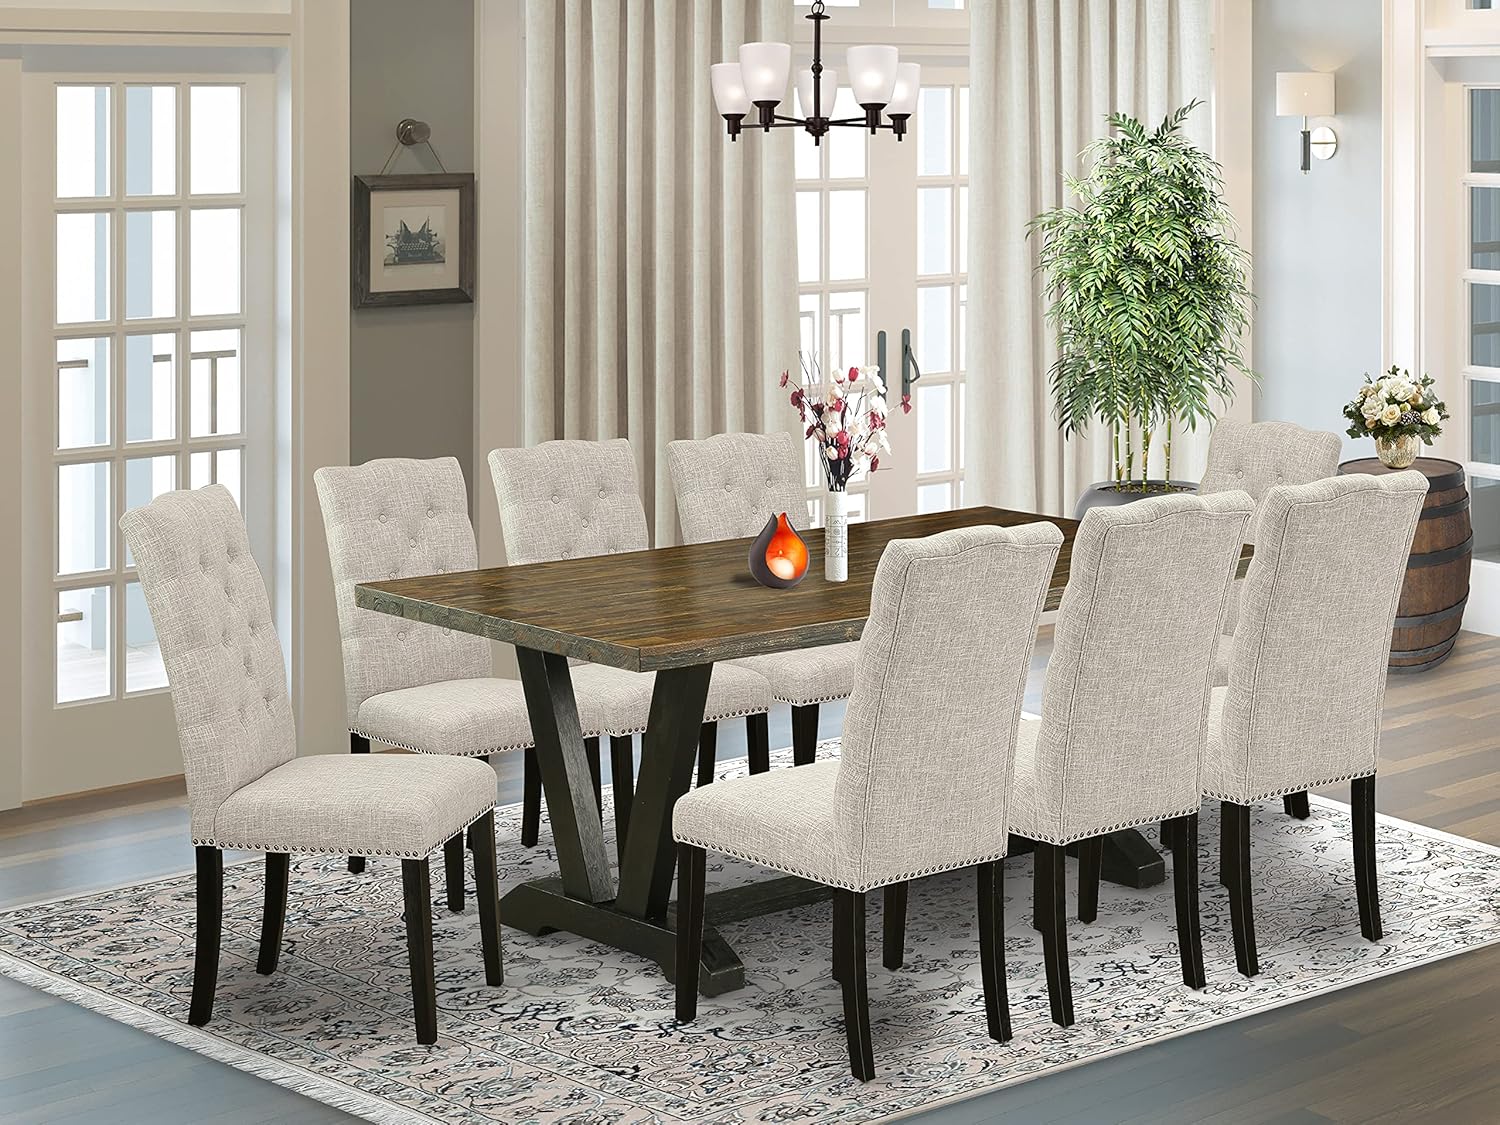 9 PC V-Style Rectangle Dining Table & Parson Chairs in Disressed Black/Jacobean